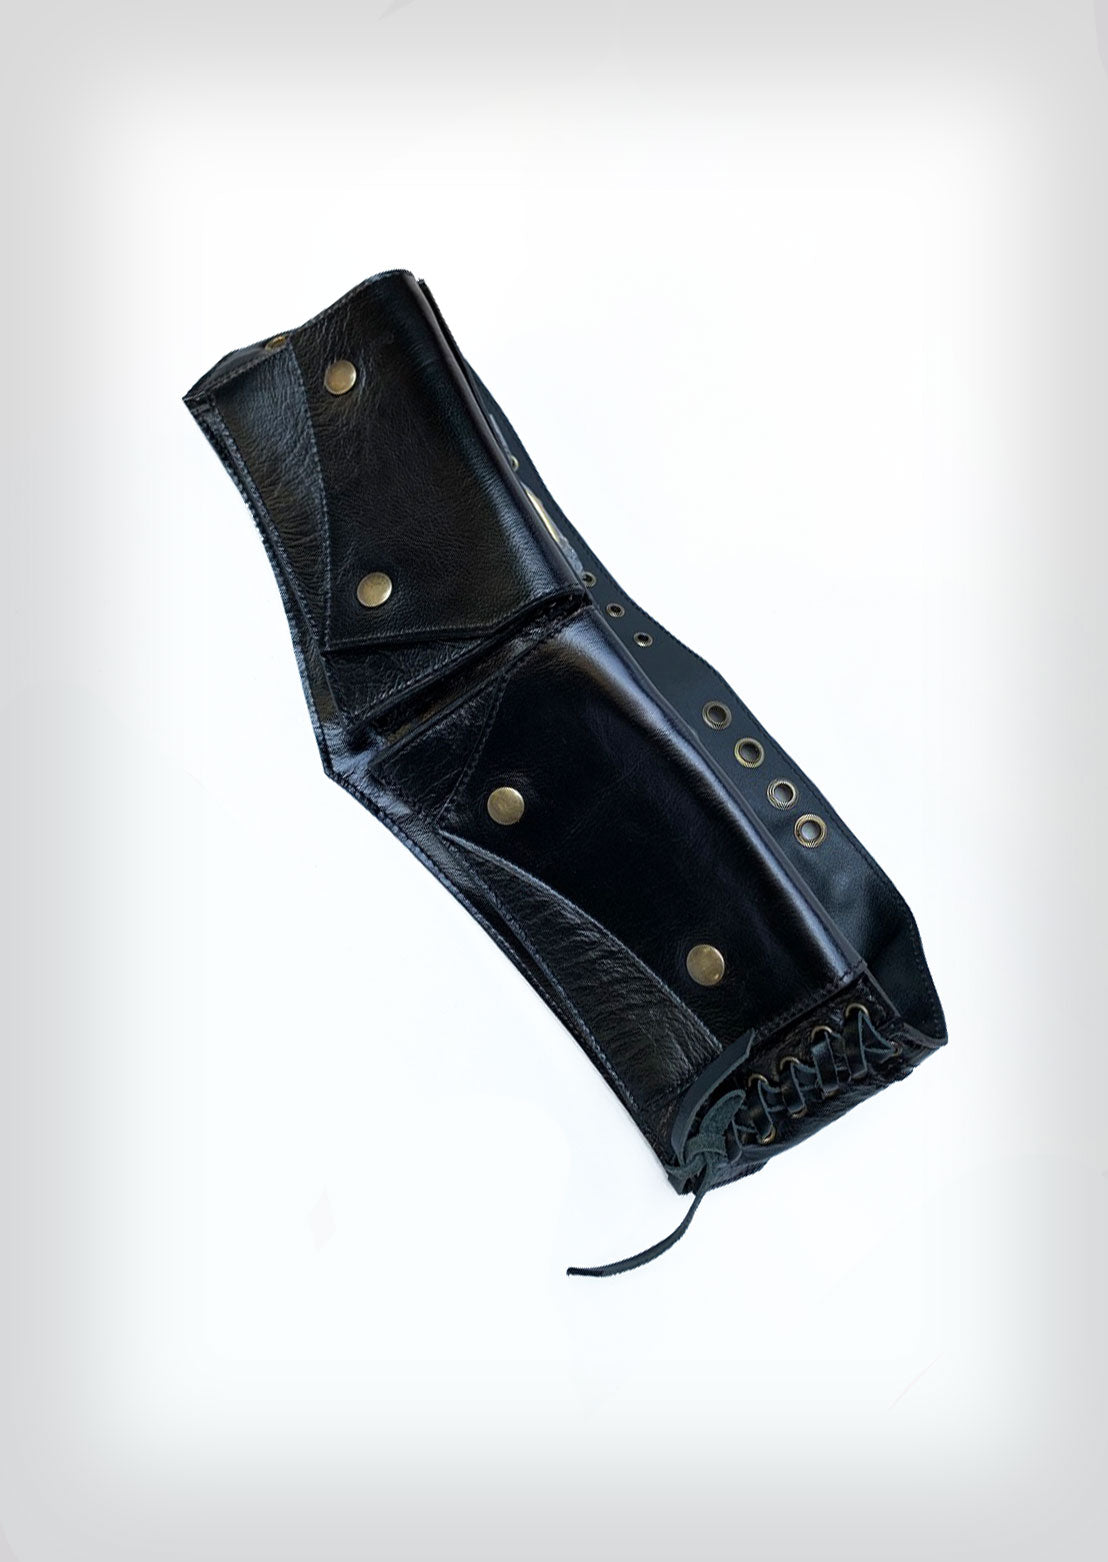 Load image into Gallery viewer, Aligned leather pocket belt
